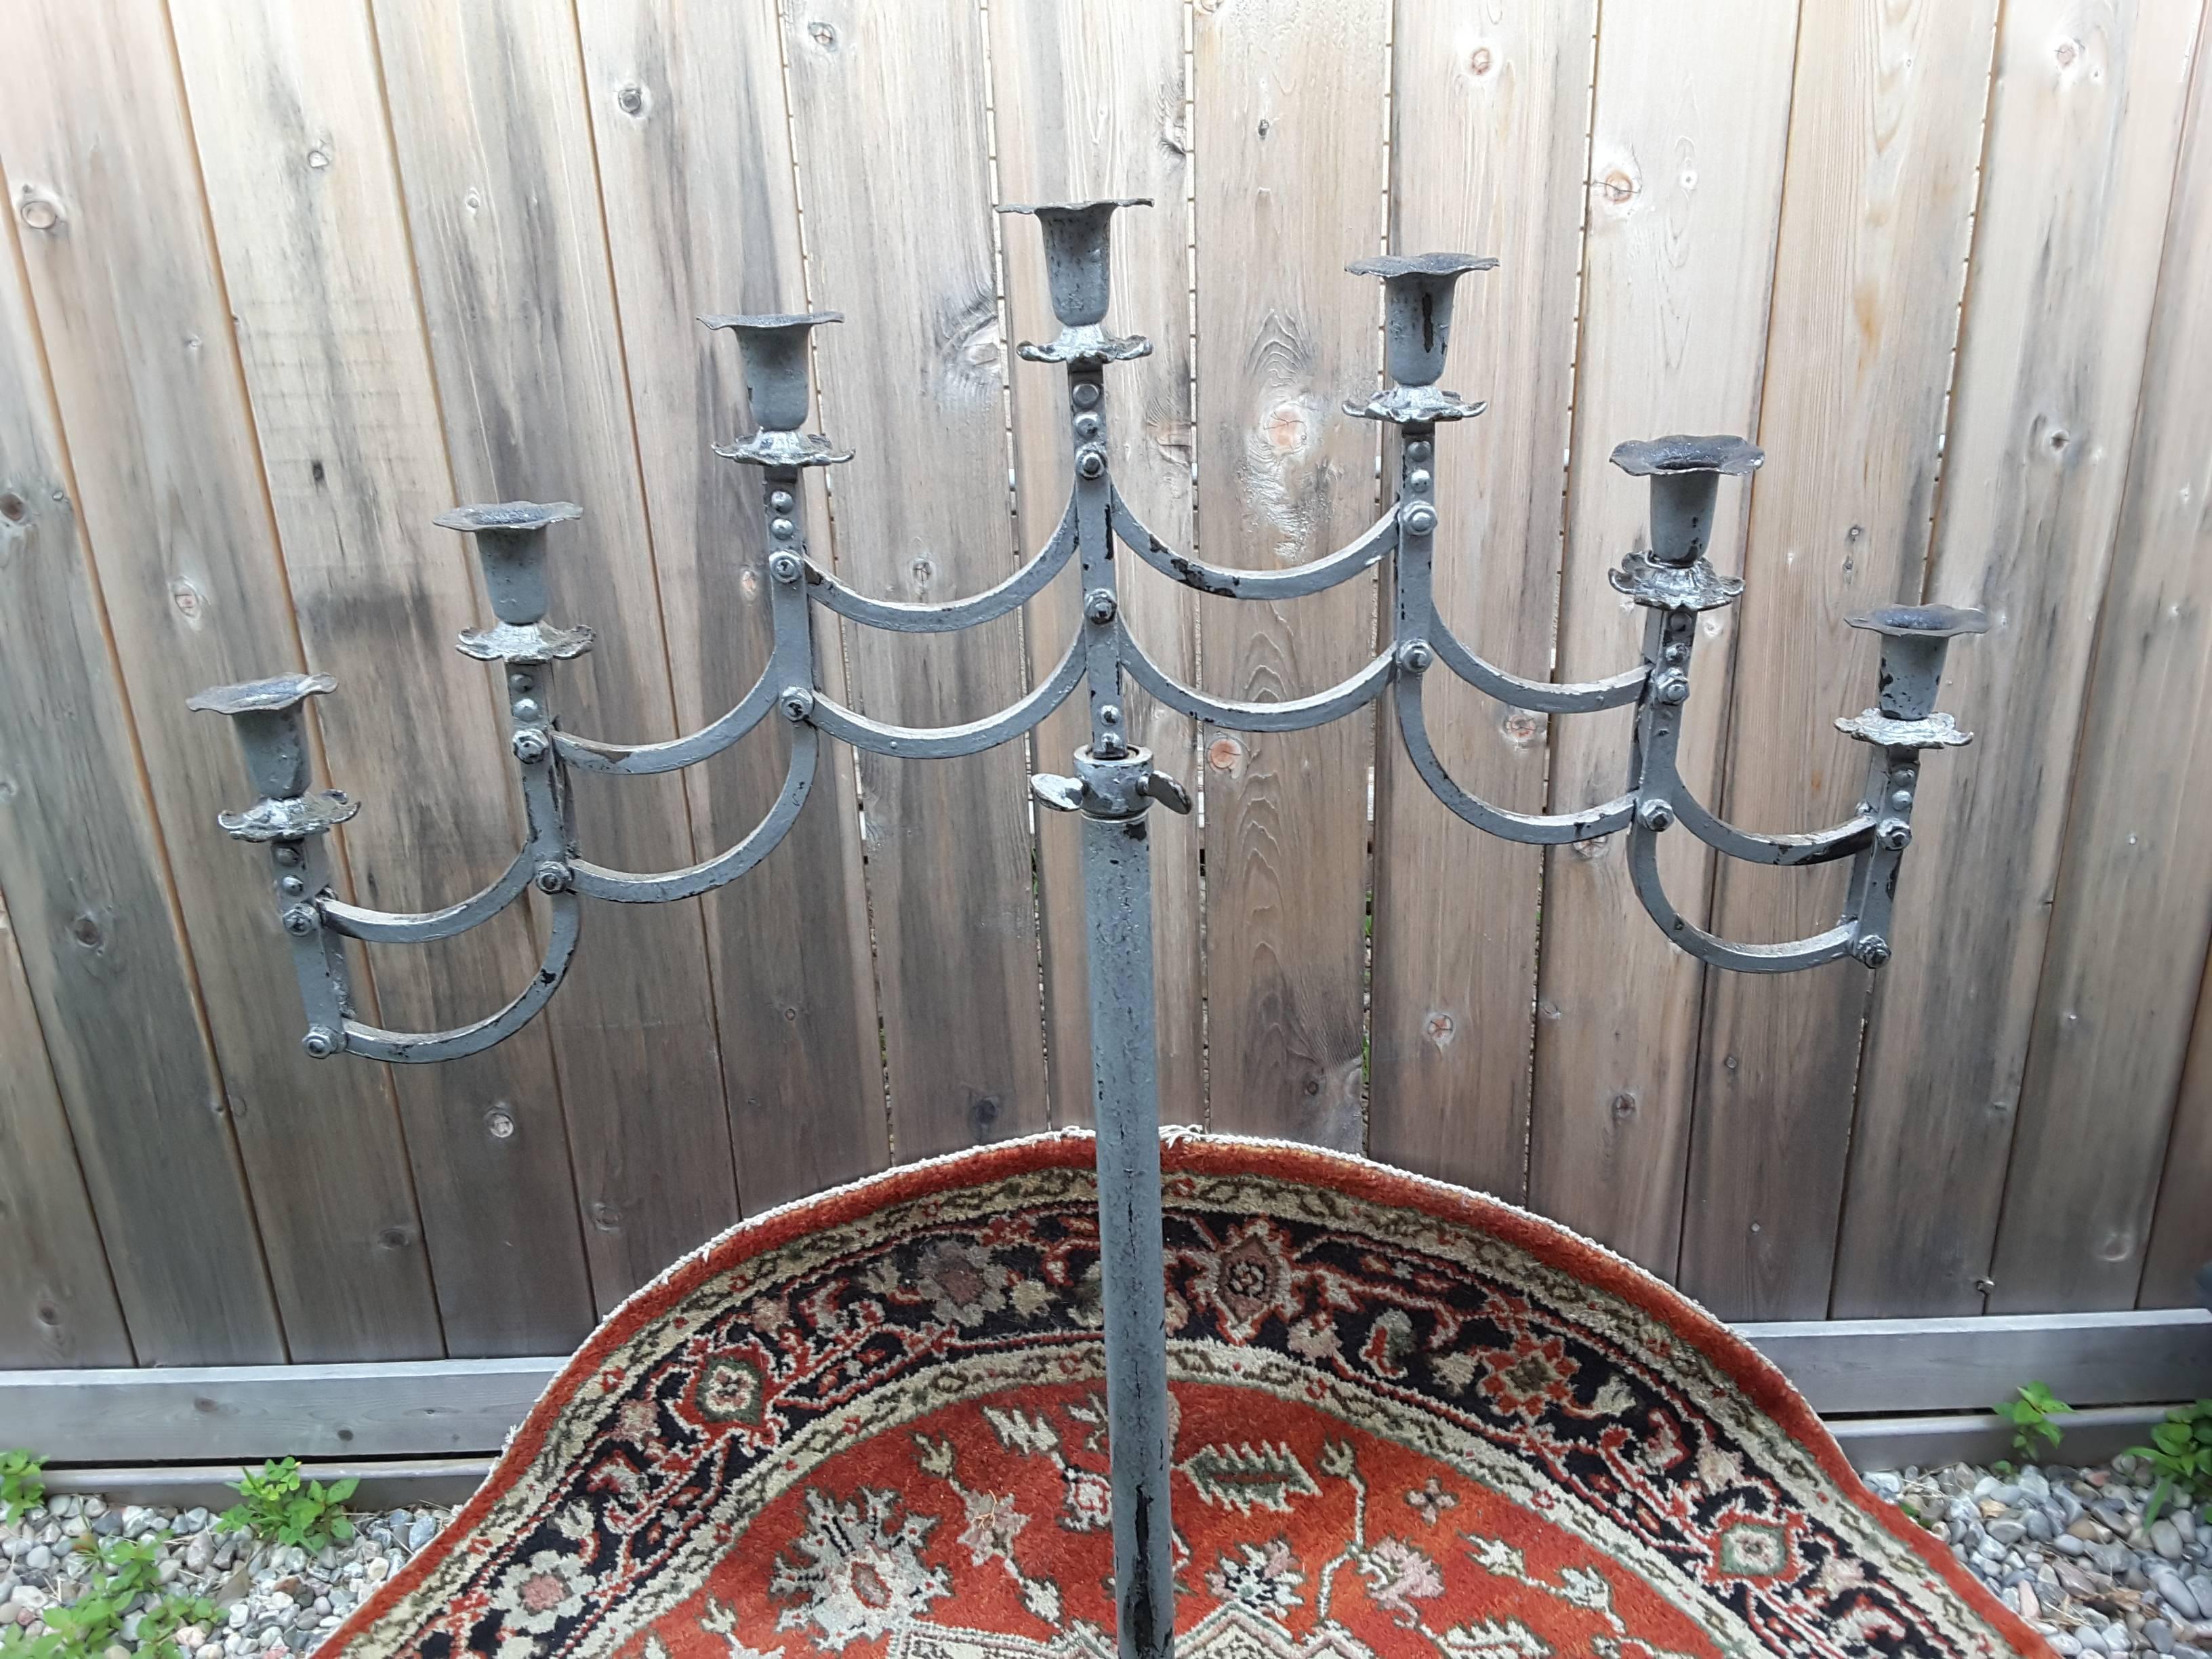 Metal Wrought Iron Candelabra with Adjustable Height and Articulated Seven-Arm Holder